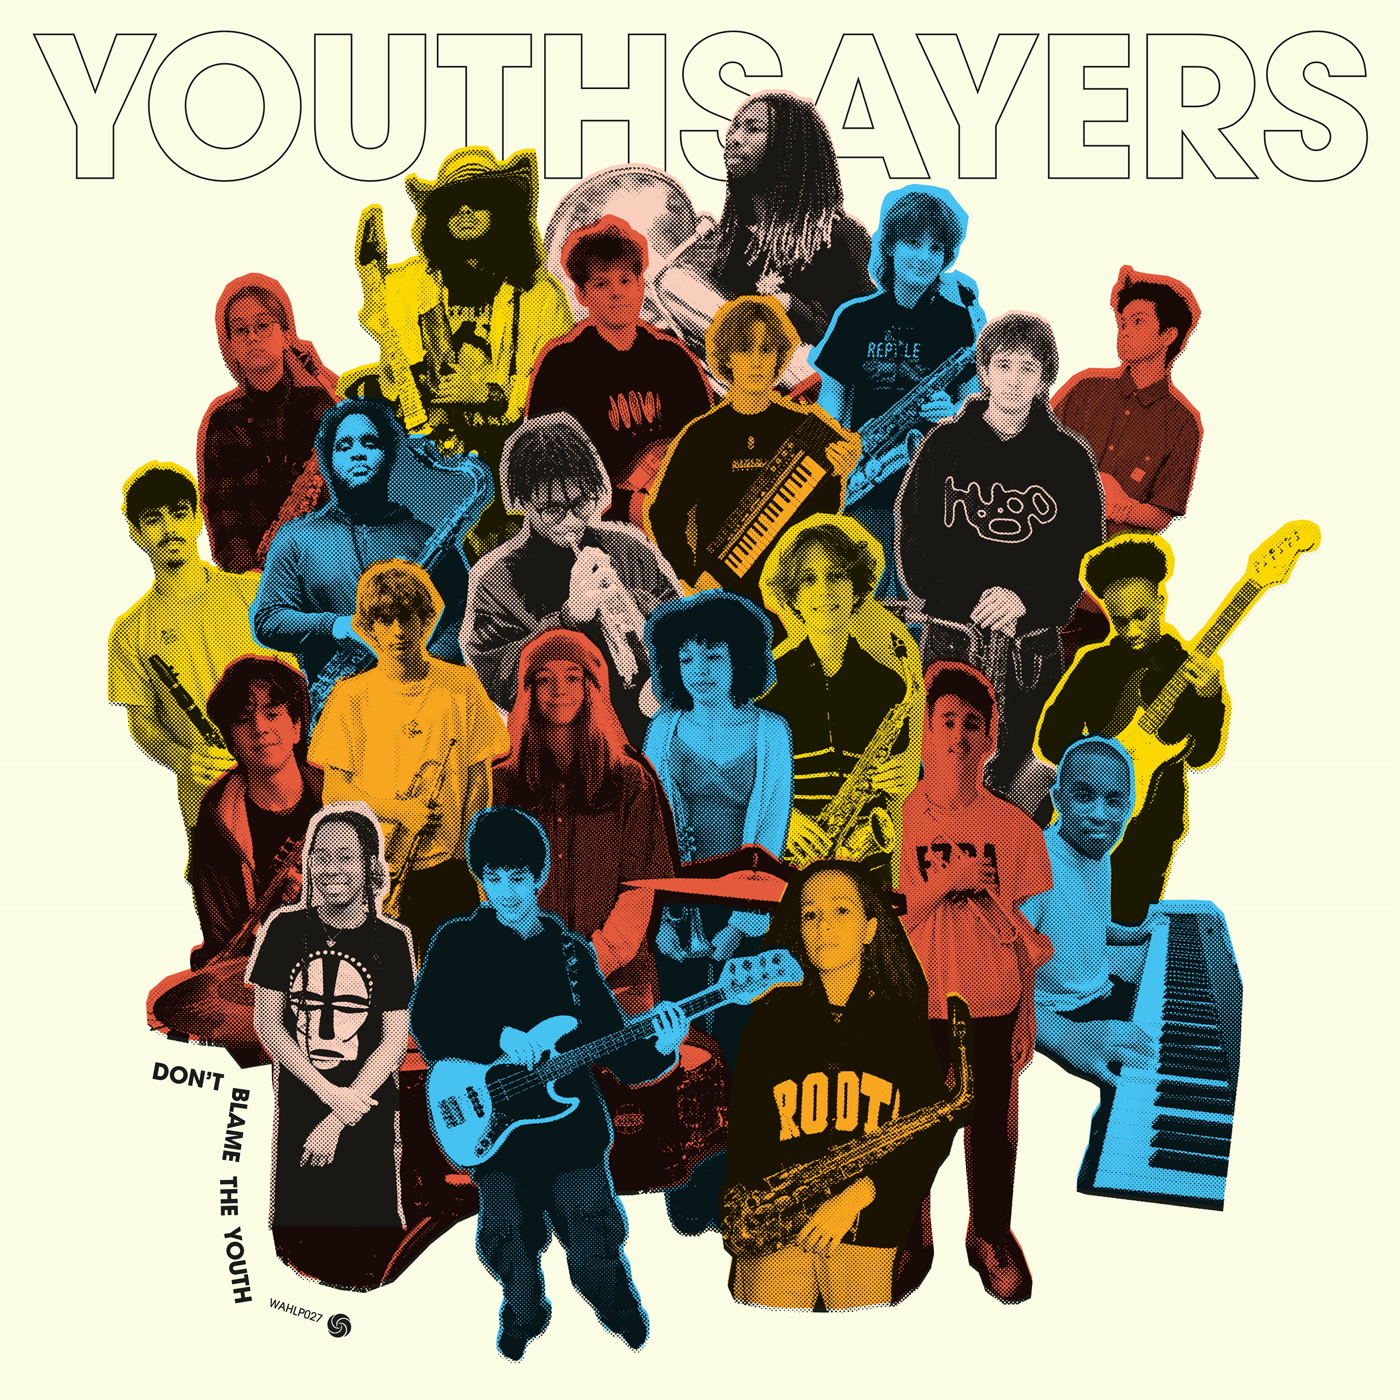 Youthsayers – Don't Blame the Youth (Wah Wah 45s)